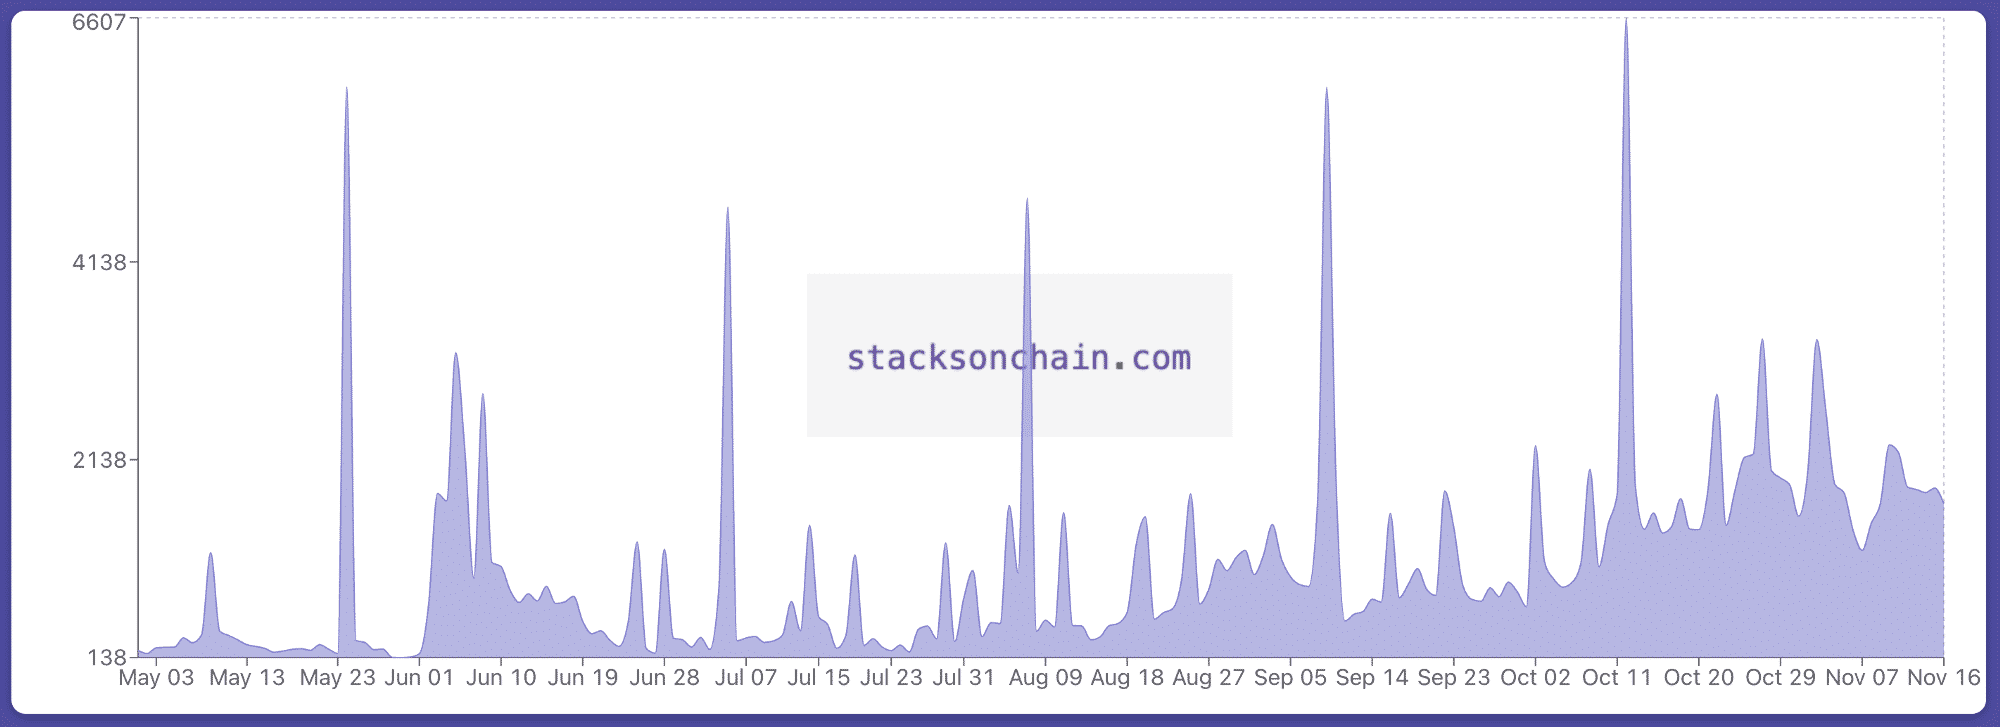 # Of Active Stacks Addresses Since 2.0 Launch